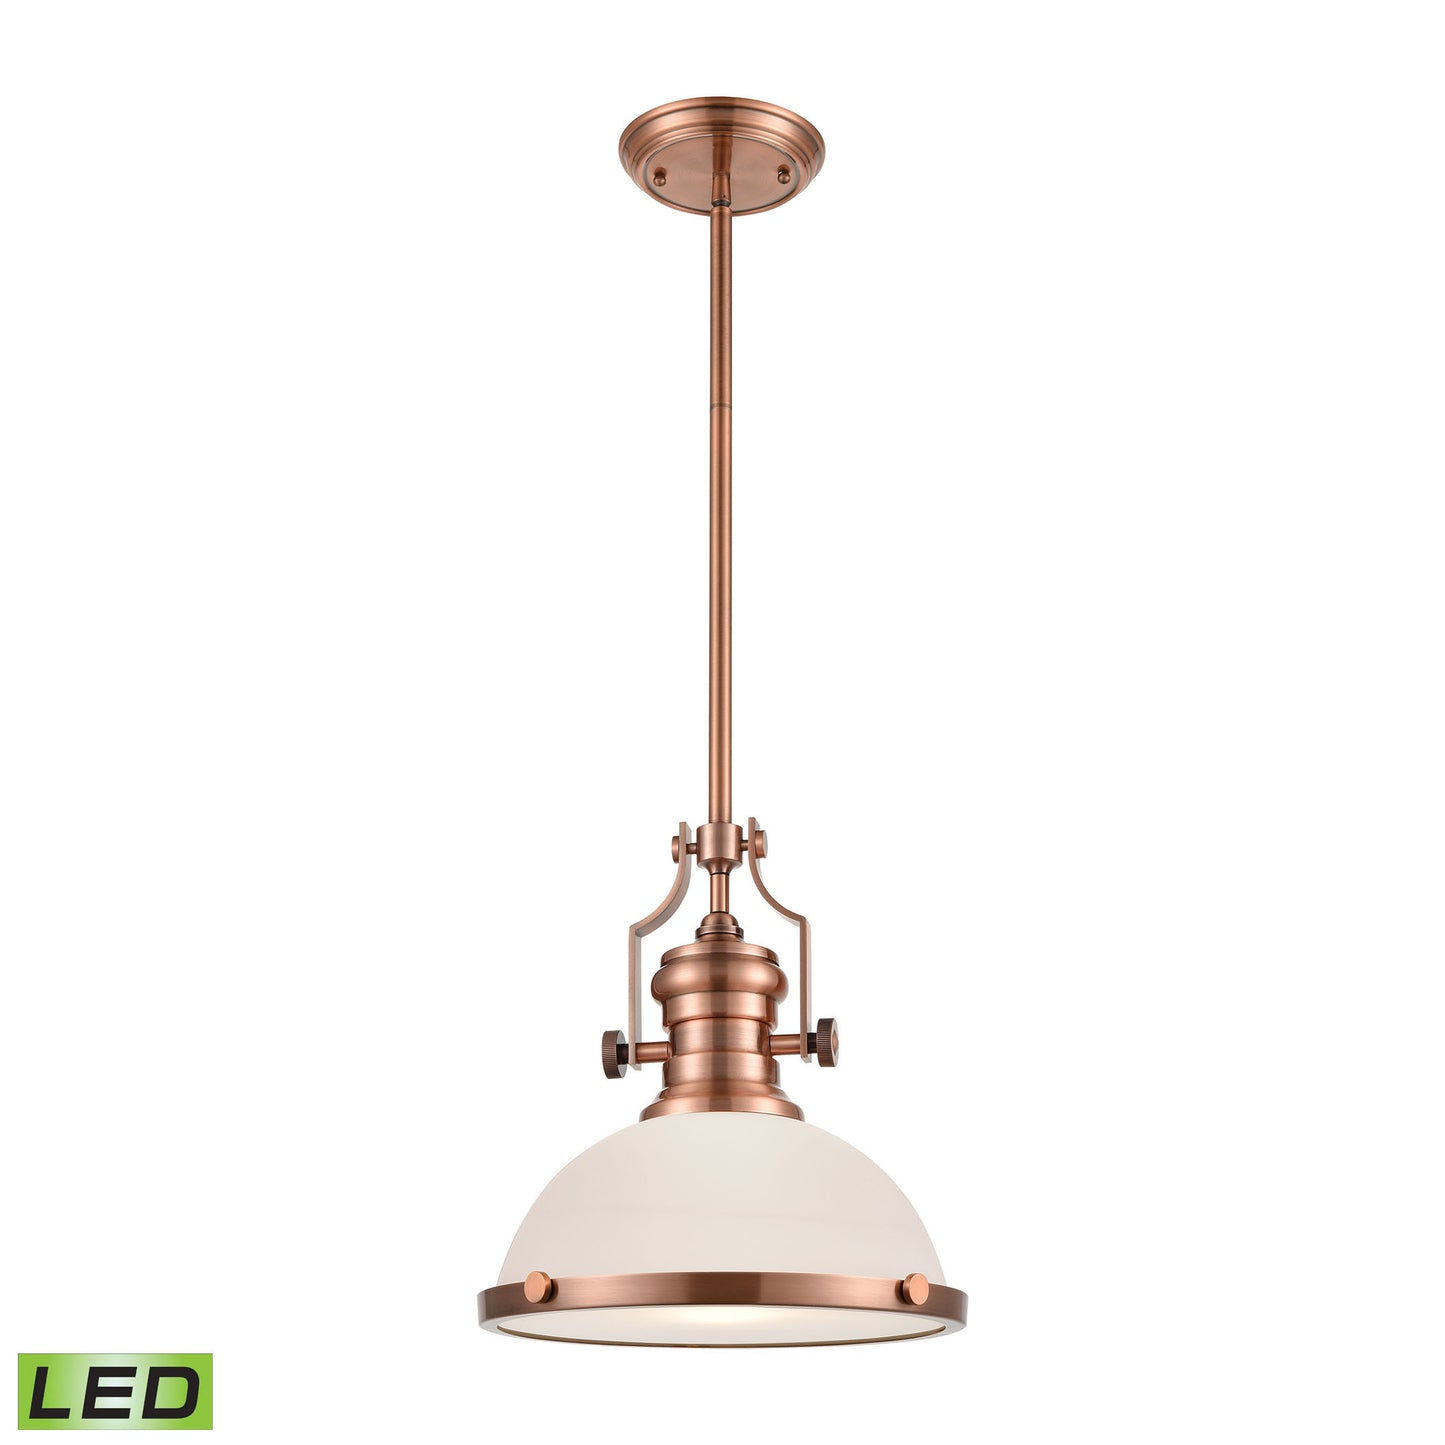 Chadwick 1-Light Pendant in Antique Copper with White Glass - Includes LED Bulb